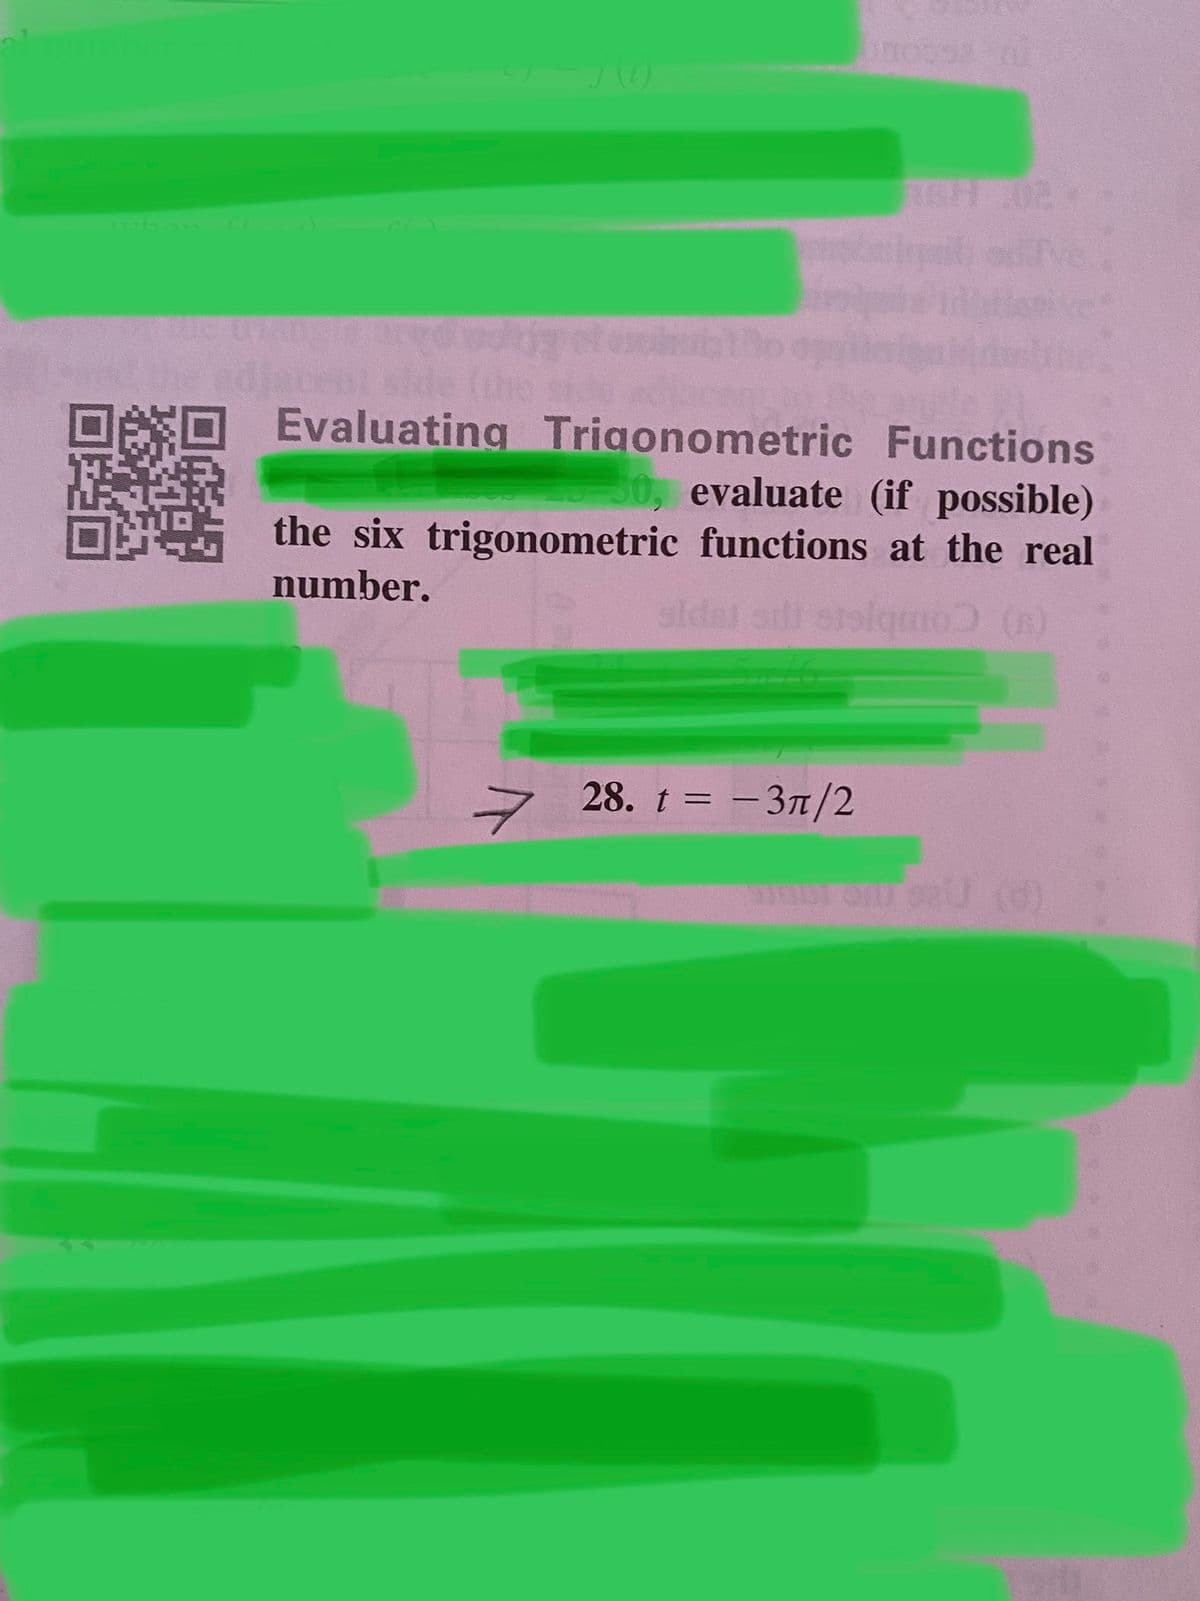 he edjacent side the
Evaluating Trigonometric Functions
30, evaluate (if possible)
the six trigonometric functions at the real
number.
sldet odi stolqmo ()
>
28. t = - 3/2
